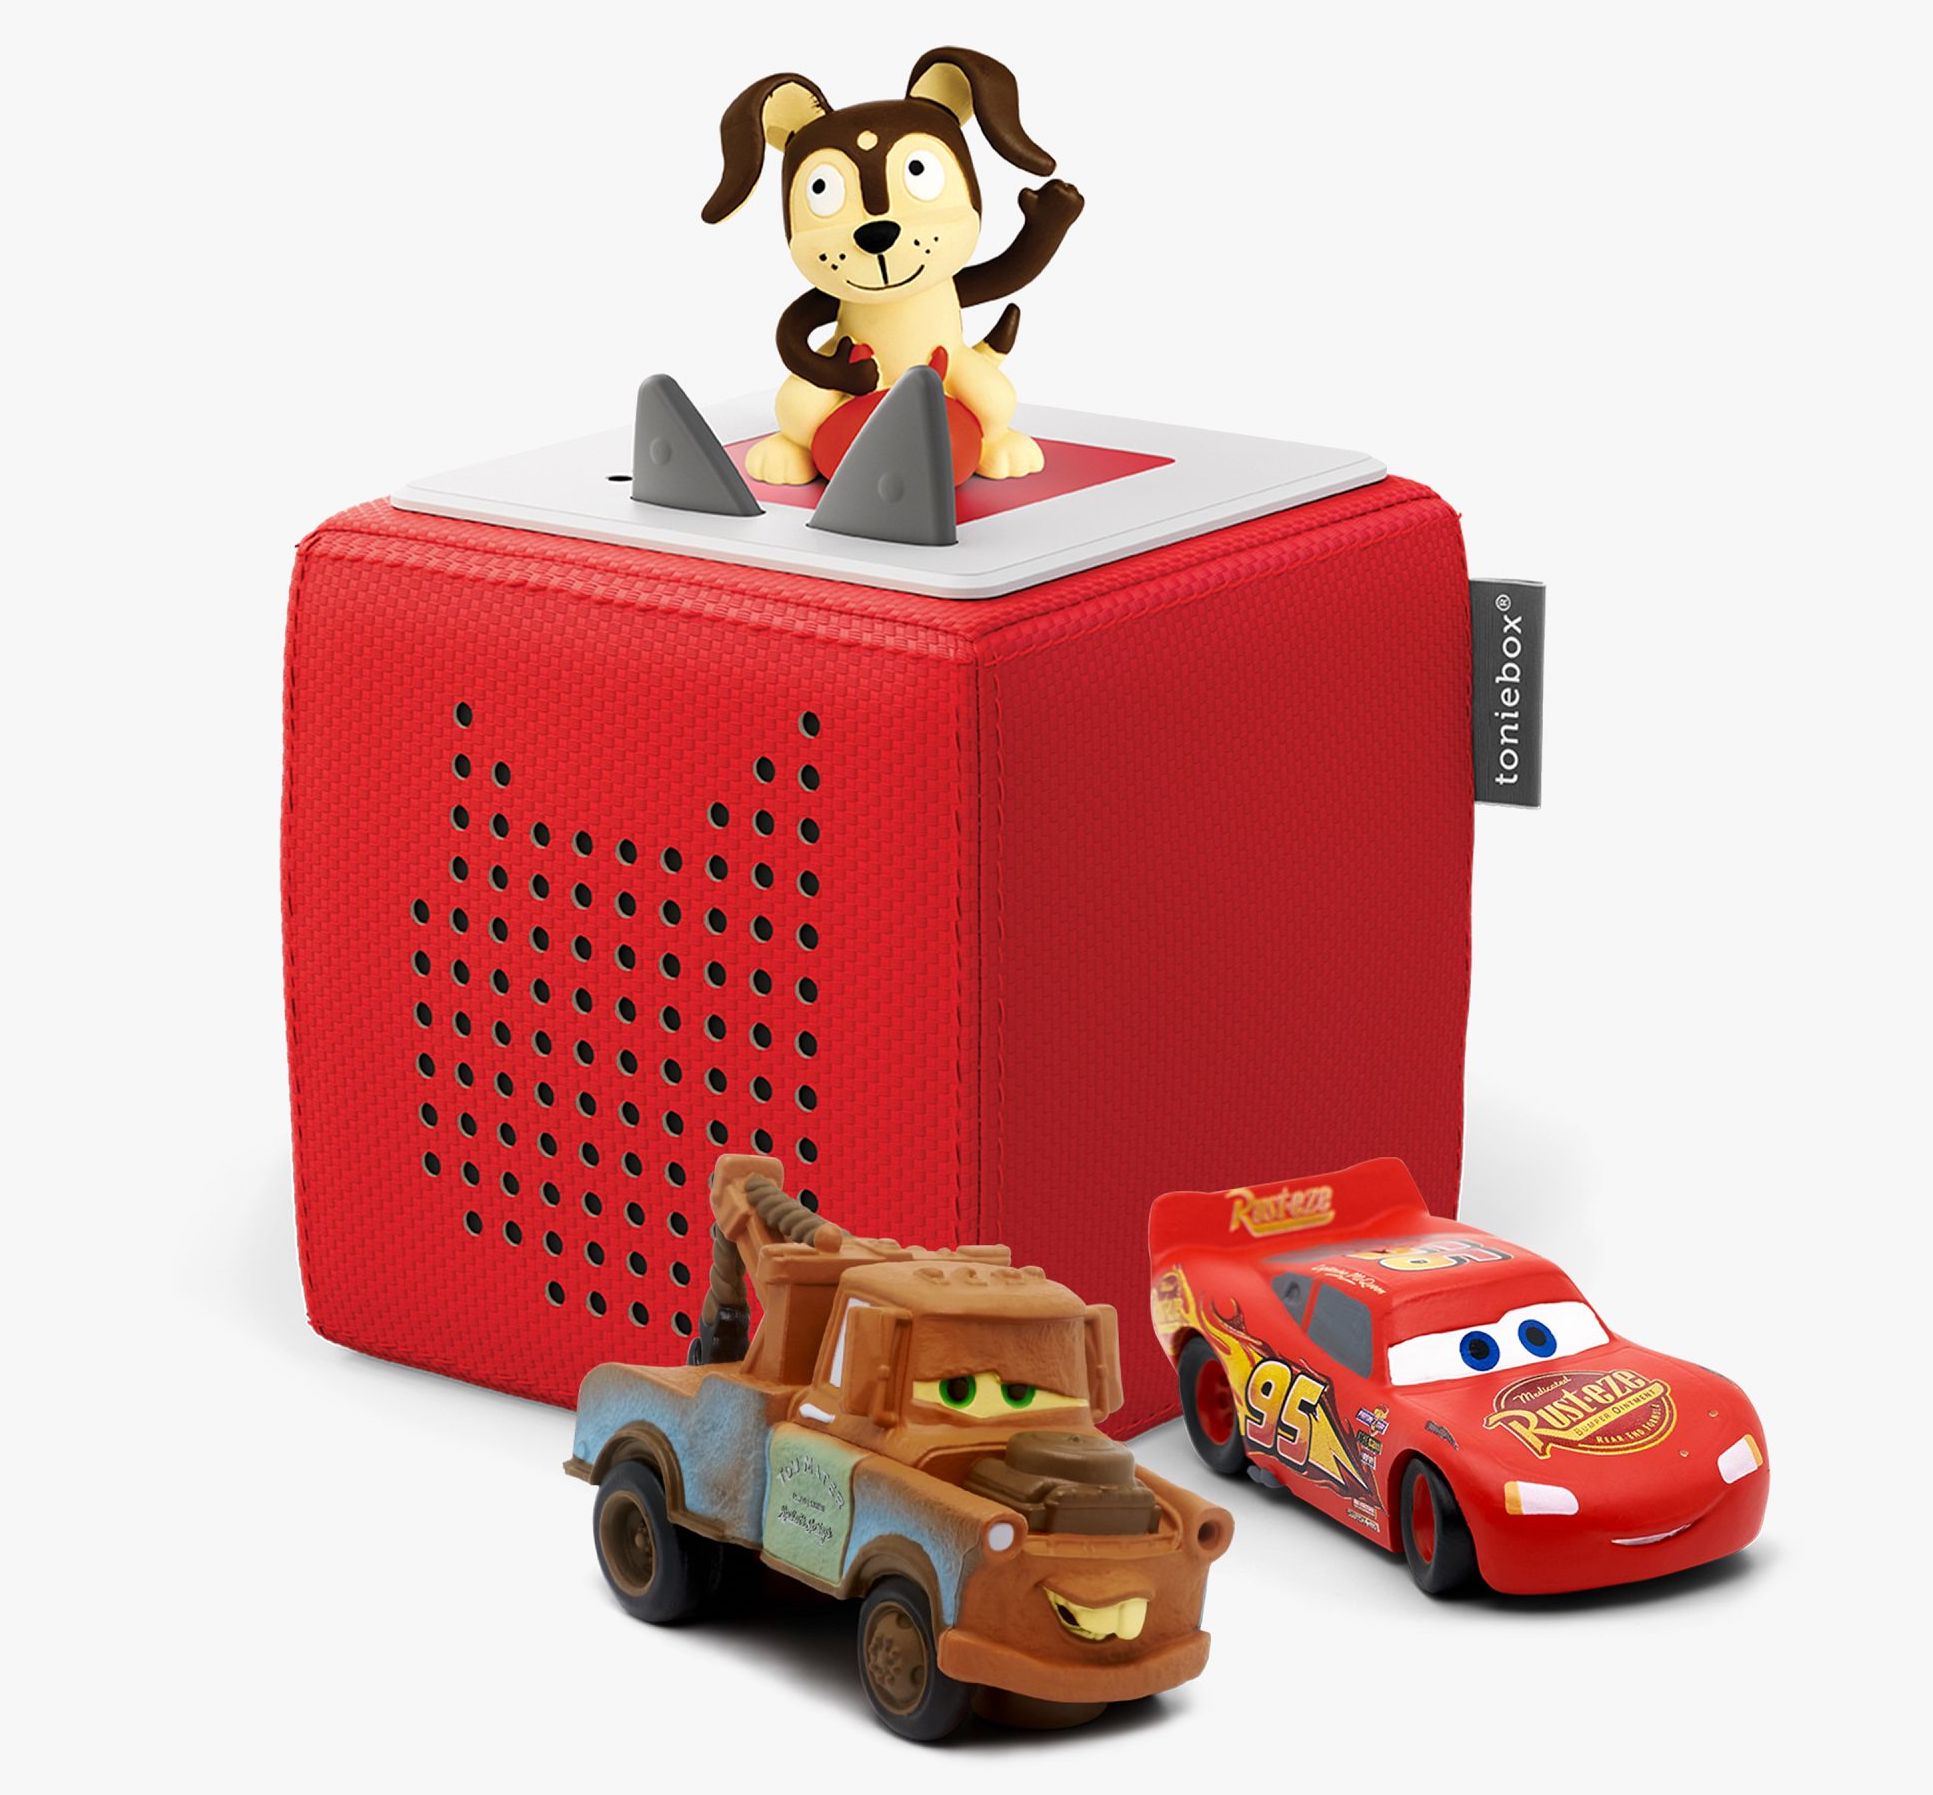 Red sound box with toy dog and cars around it